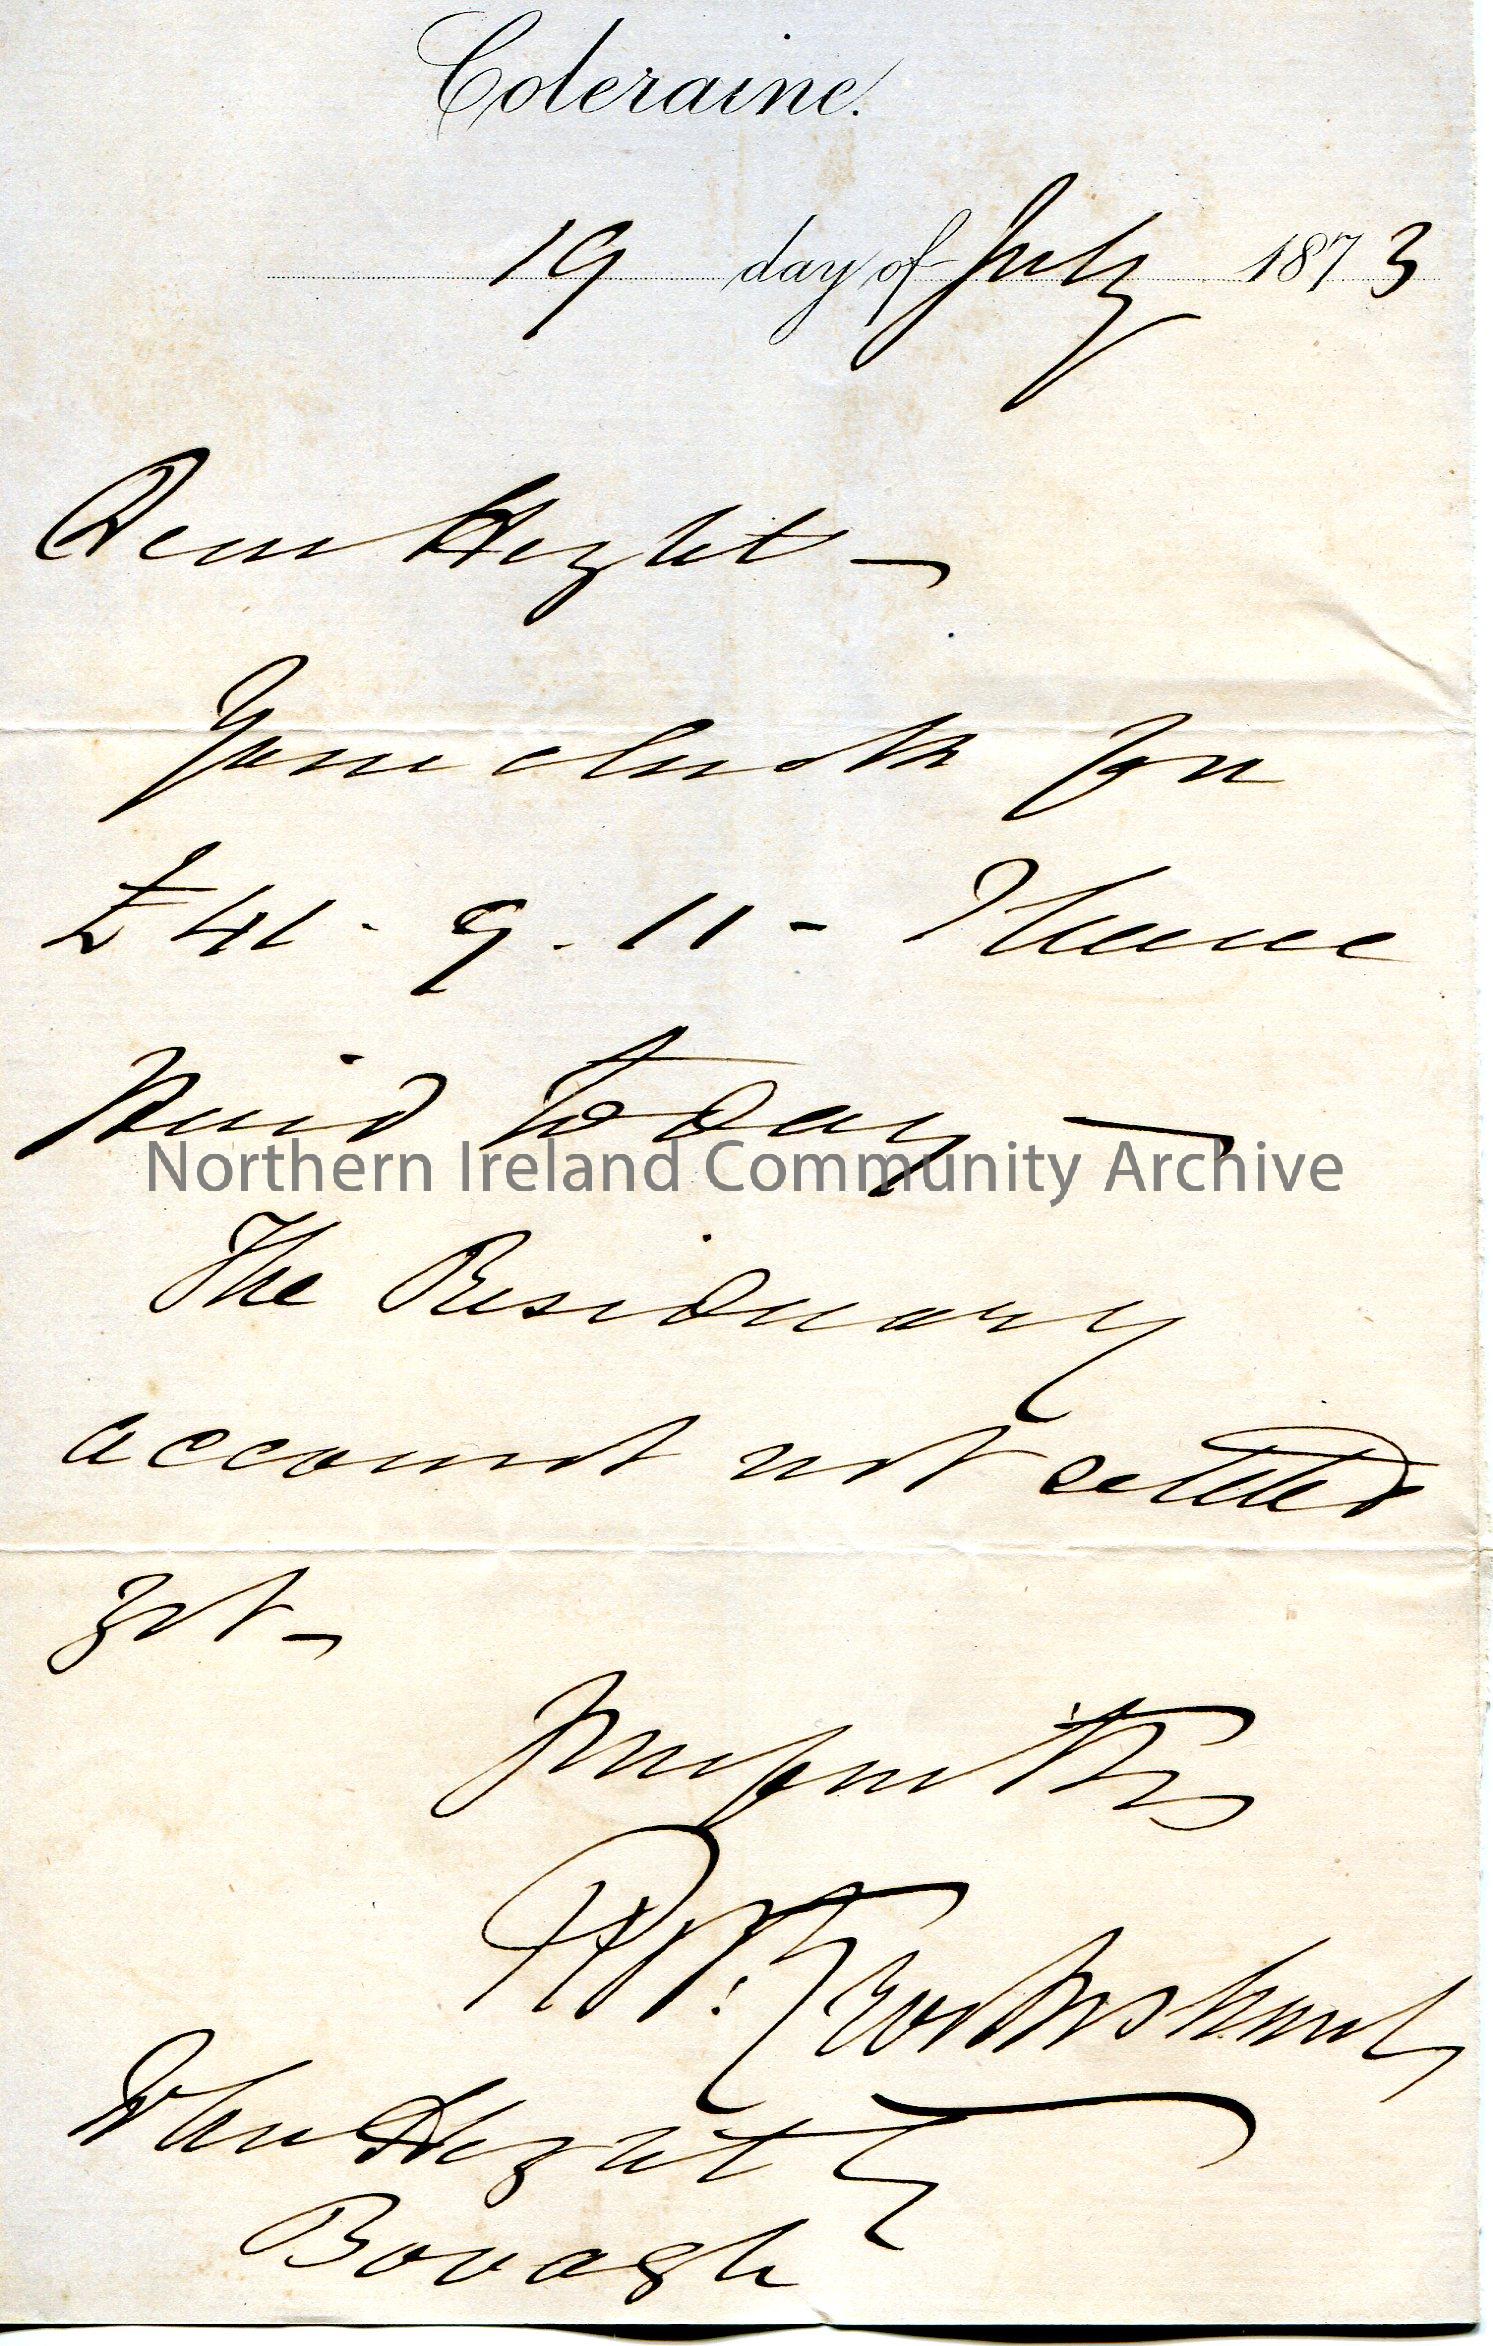 Handwritten letter to John Hezlet, Bovagh. Writing re settlement of accounts. Mentions a sum of £41.9.11.